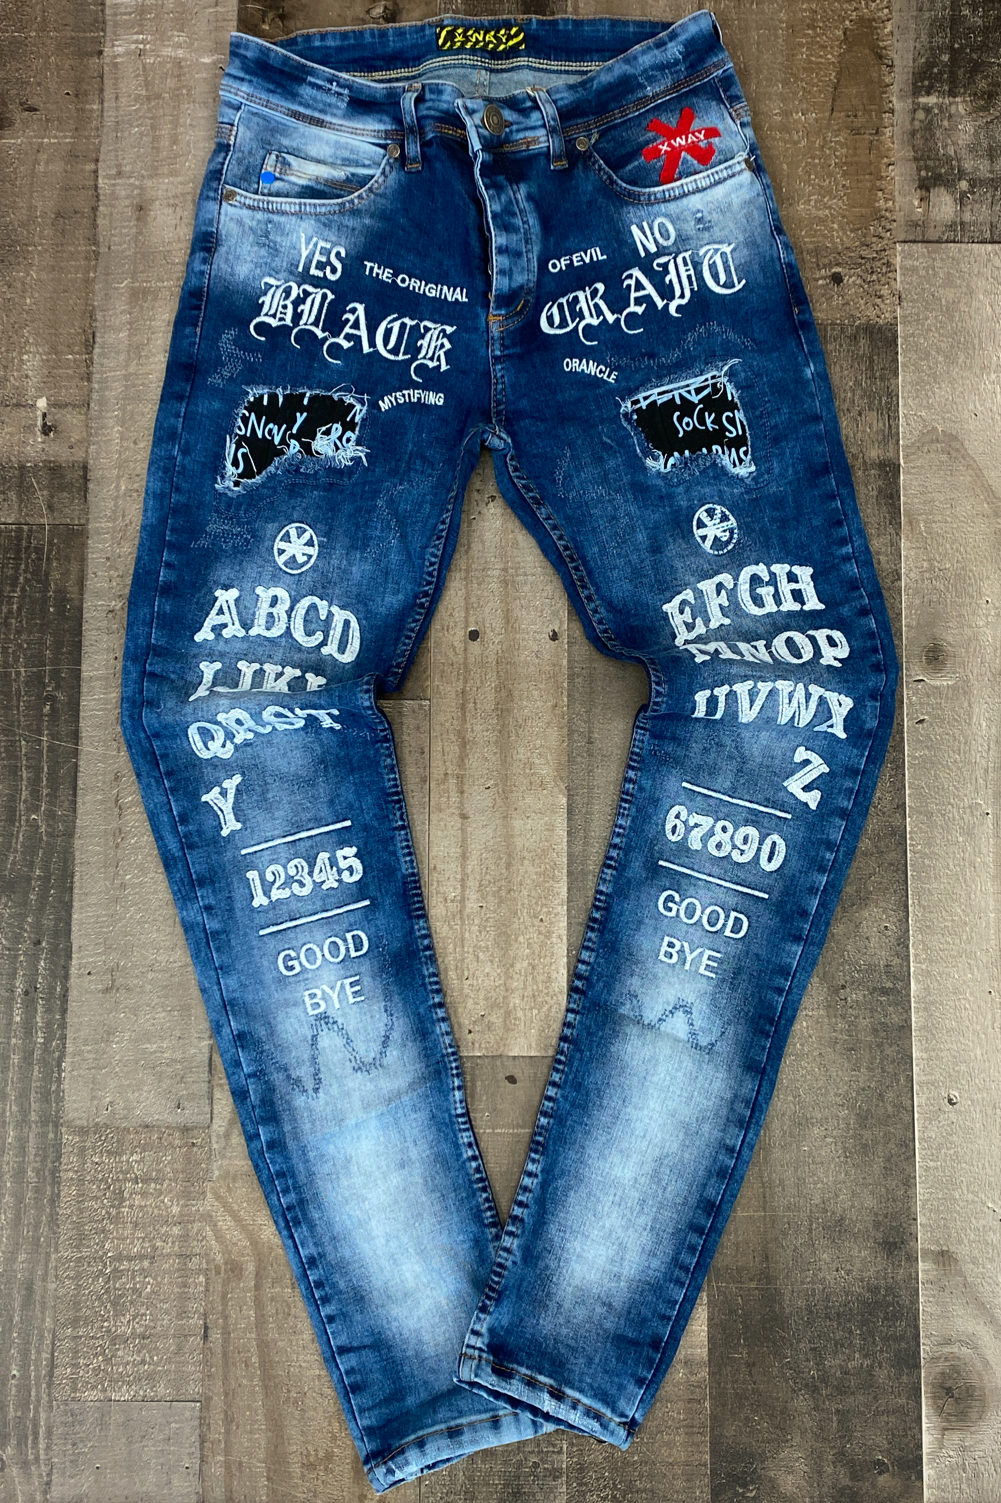 X Way- abcd jeans (blue)